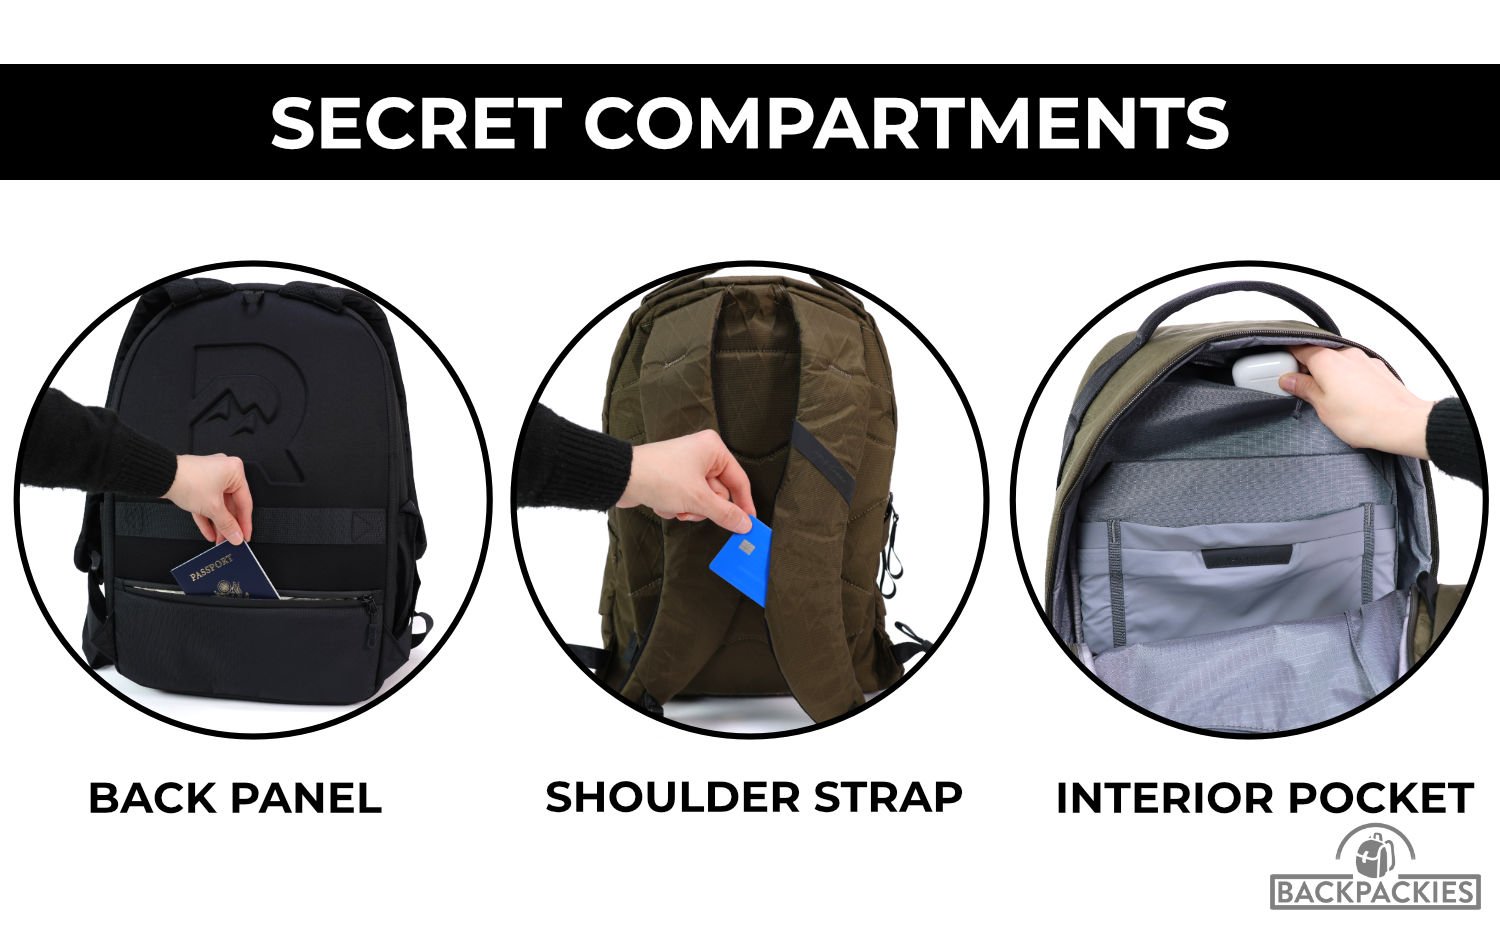 15 Best Backpacks with Secret Compartments - Tested and Reviewed ...